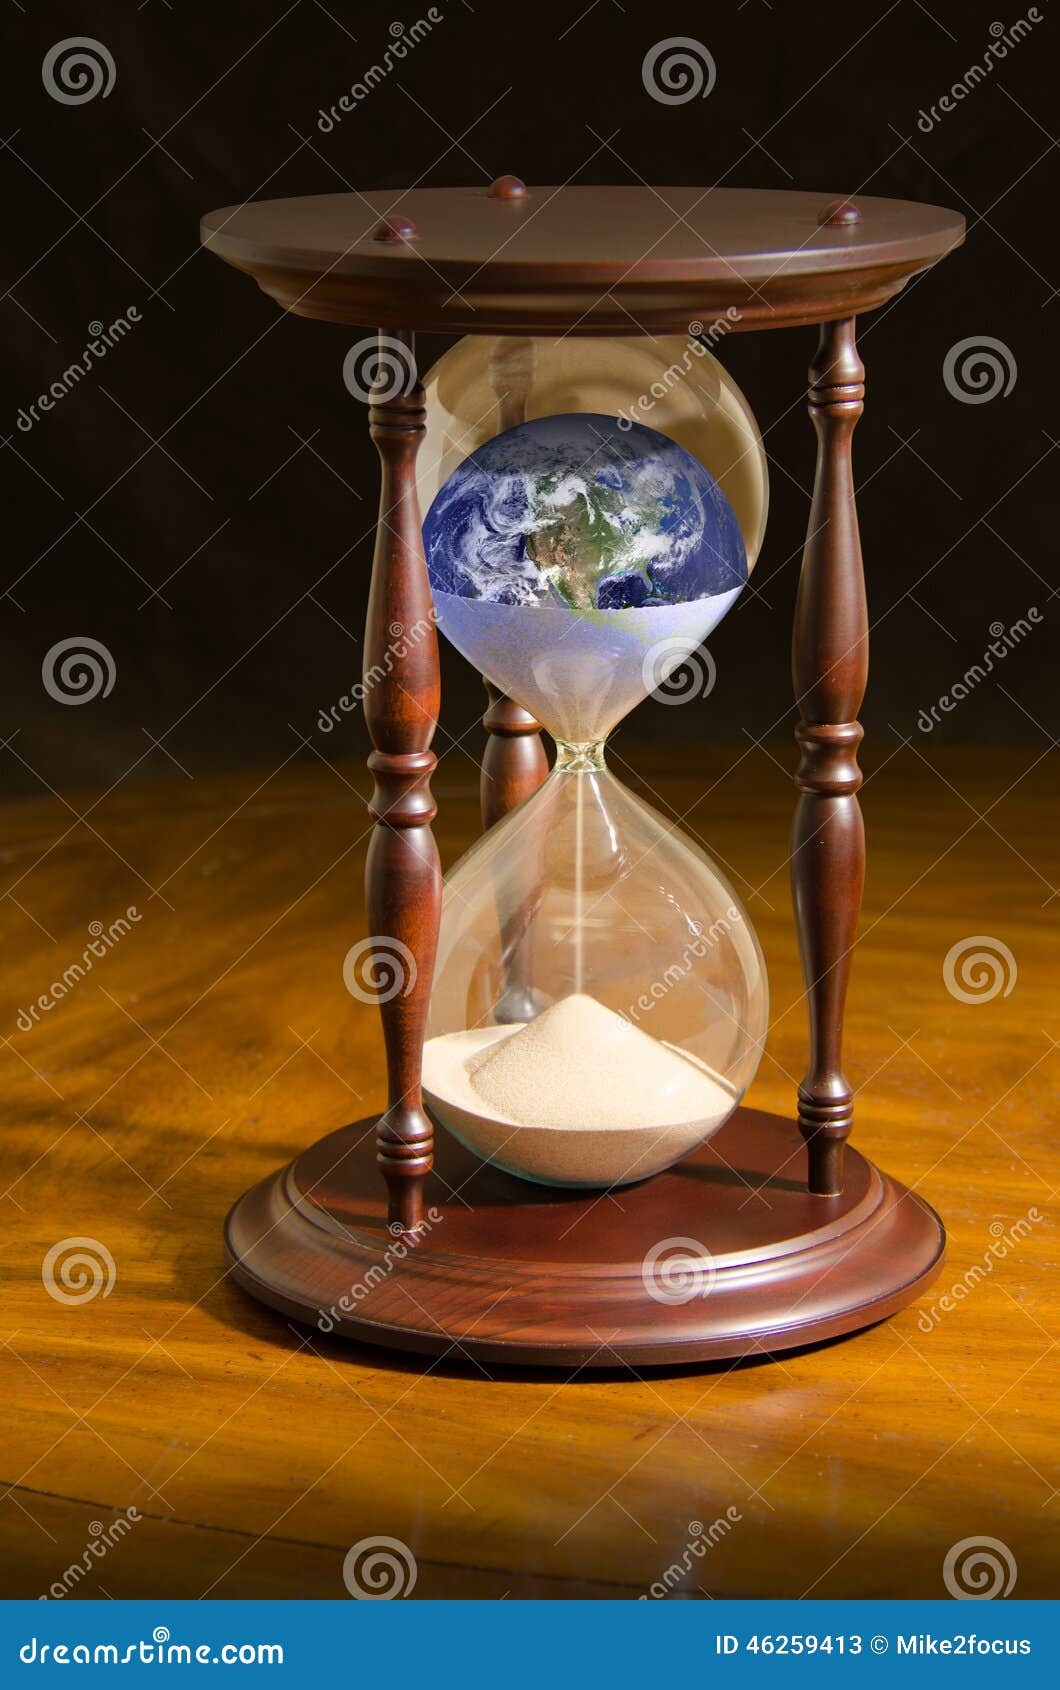 running out time climate change eco apocalypse